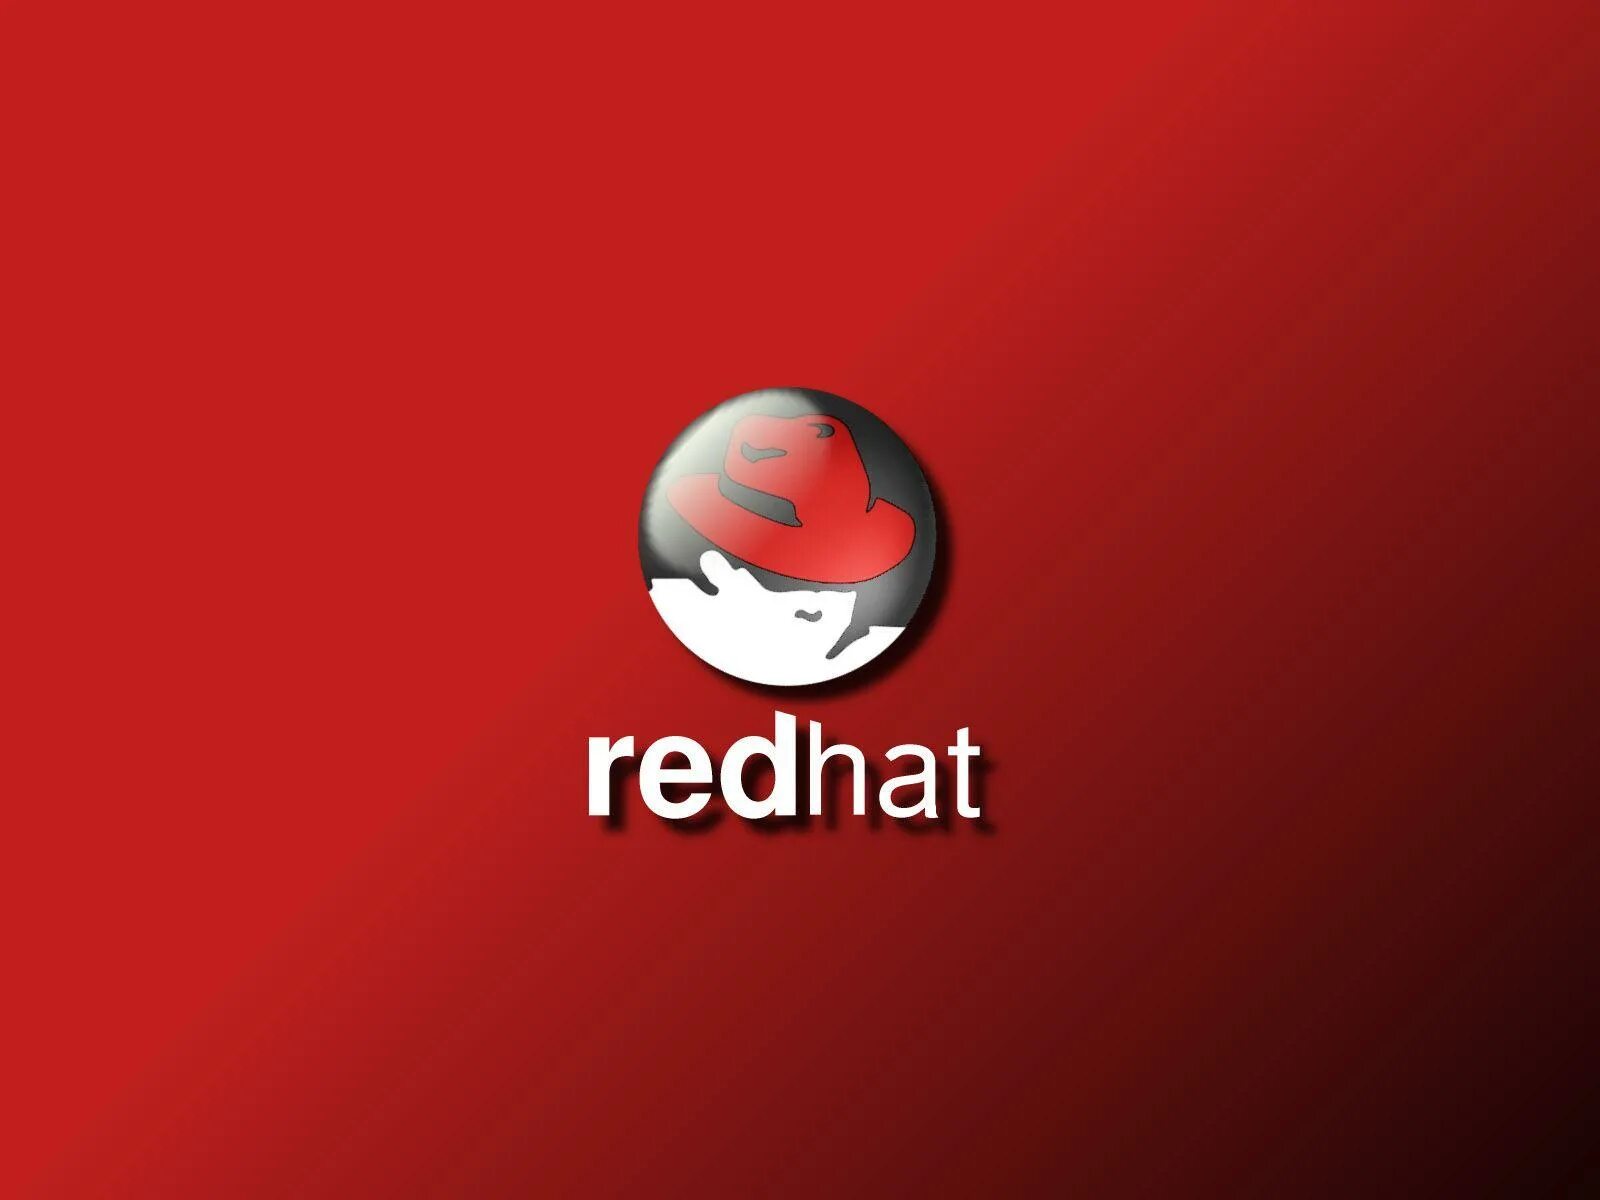 Red hat 7. Линукс Red hat. Red hat Enterprise Linux 7. Red hat Enterprise Linux. Red hat Enterprise Linux логотип.